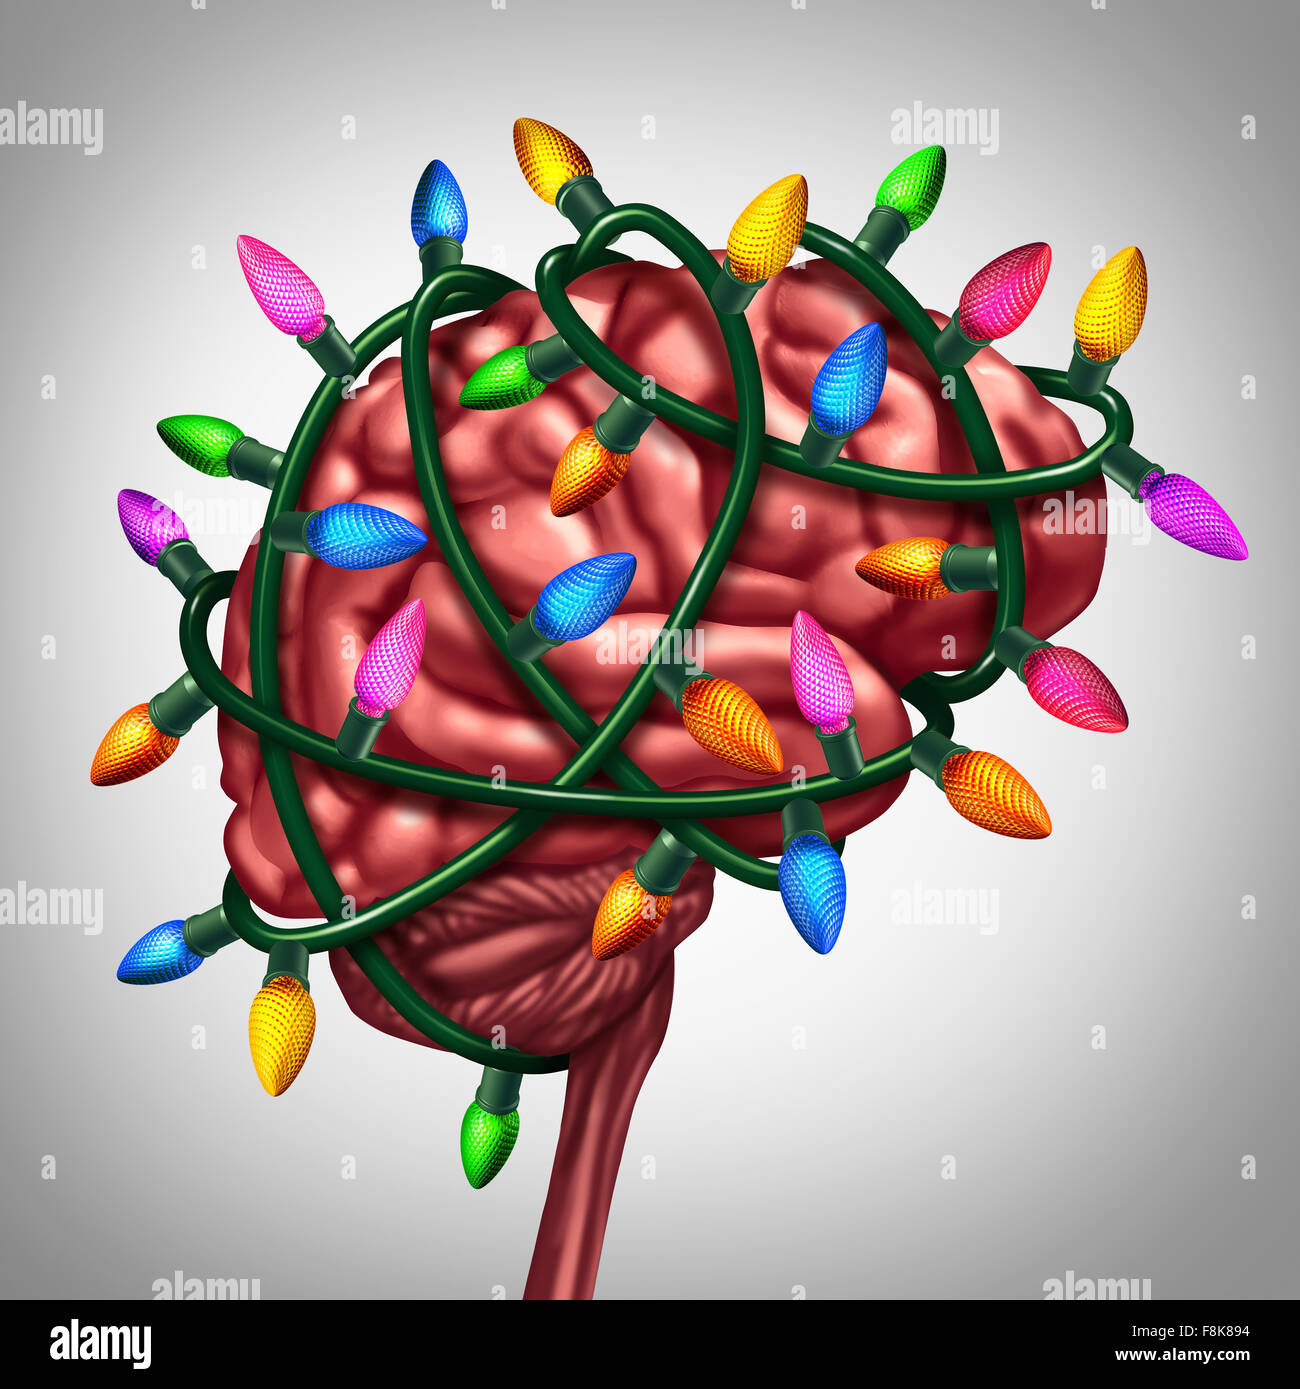 Holiday thinking and christmas memories concept as bright festive lights wrapped around a human brain as a metaphor for winter seasonal ideas as a new year and celebration symbol for decorating or gift giving inspiration. Stock Photo